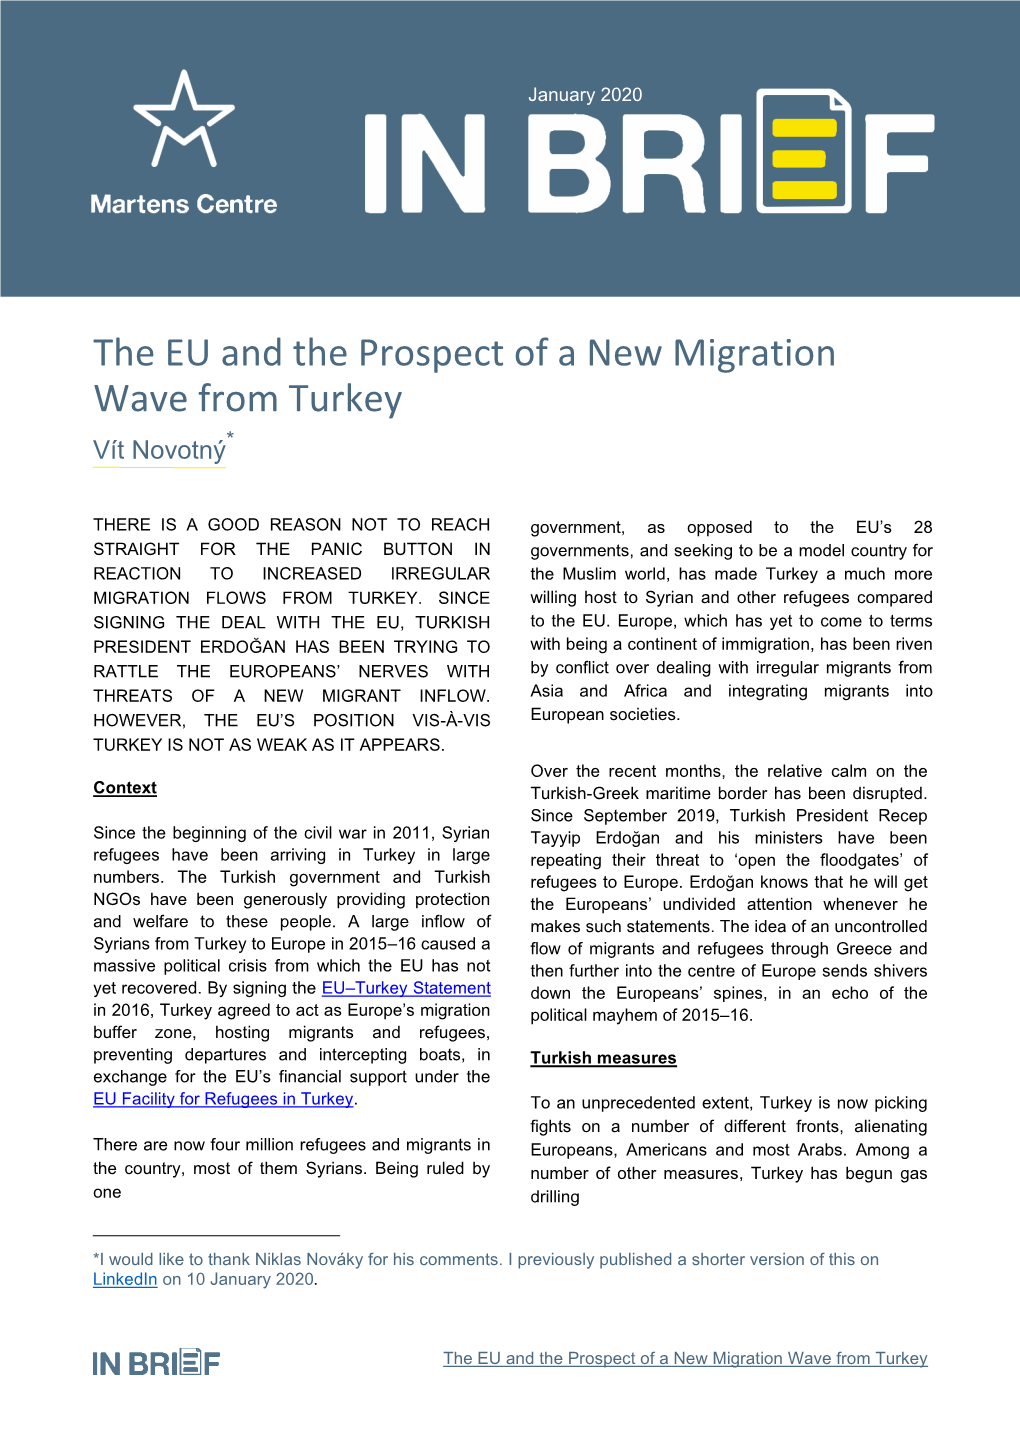 The EU and the Prospect of a New Migration Wave from Turkey 2